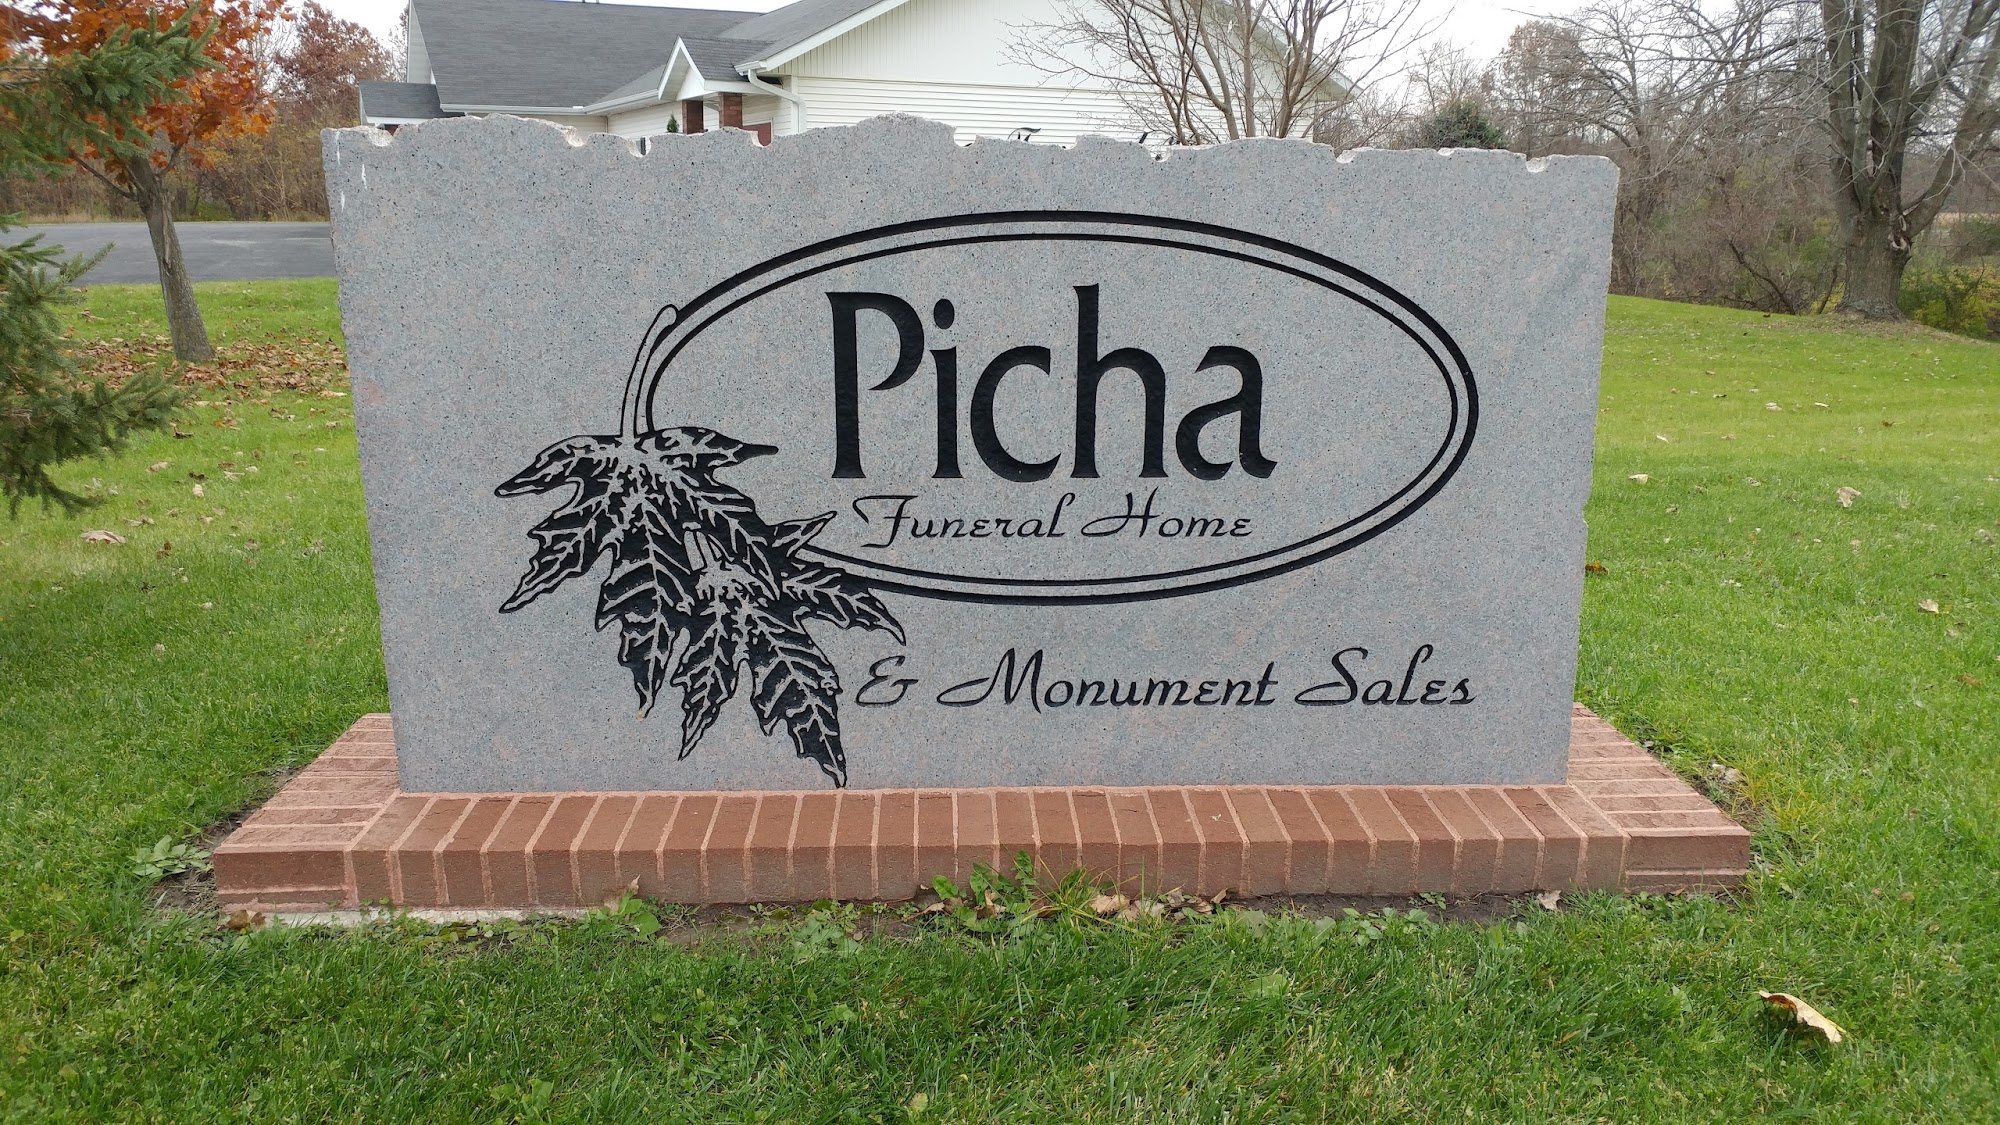 Picha Funeral Home 1600 Academy St, Elroy Wisconsin 53929